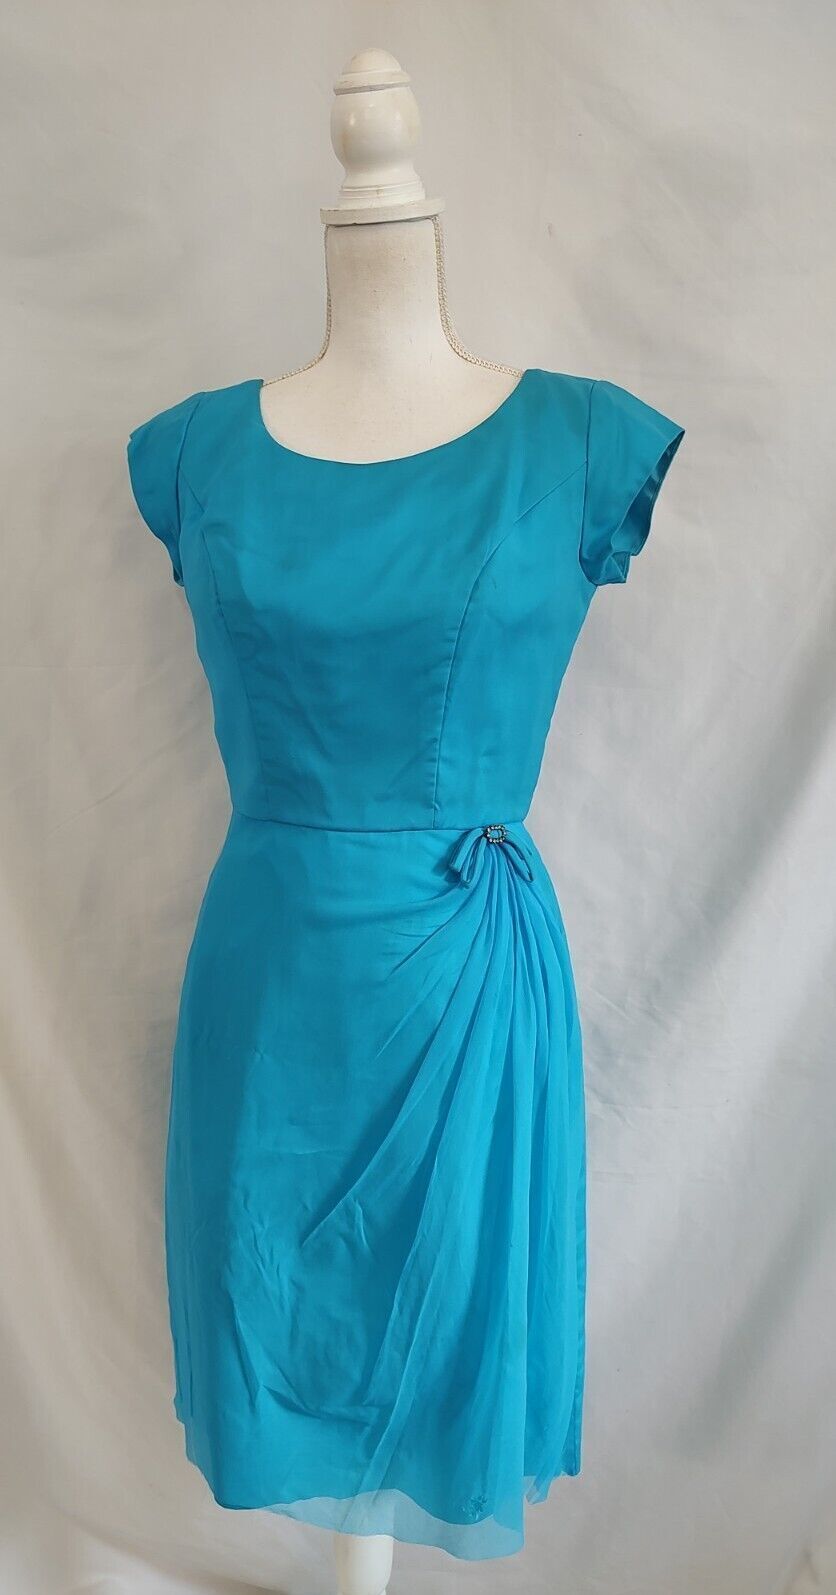 60s Vintage Turquoise Cocktail Dress Boat Neck Bow Detail Crepe Overlay Sz S